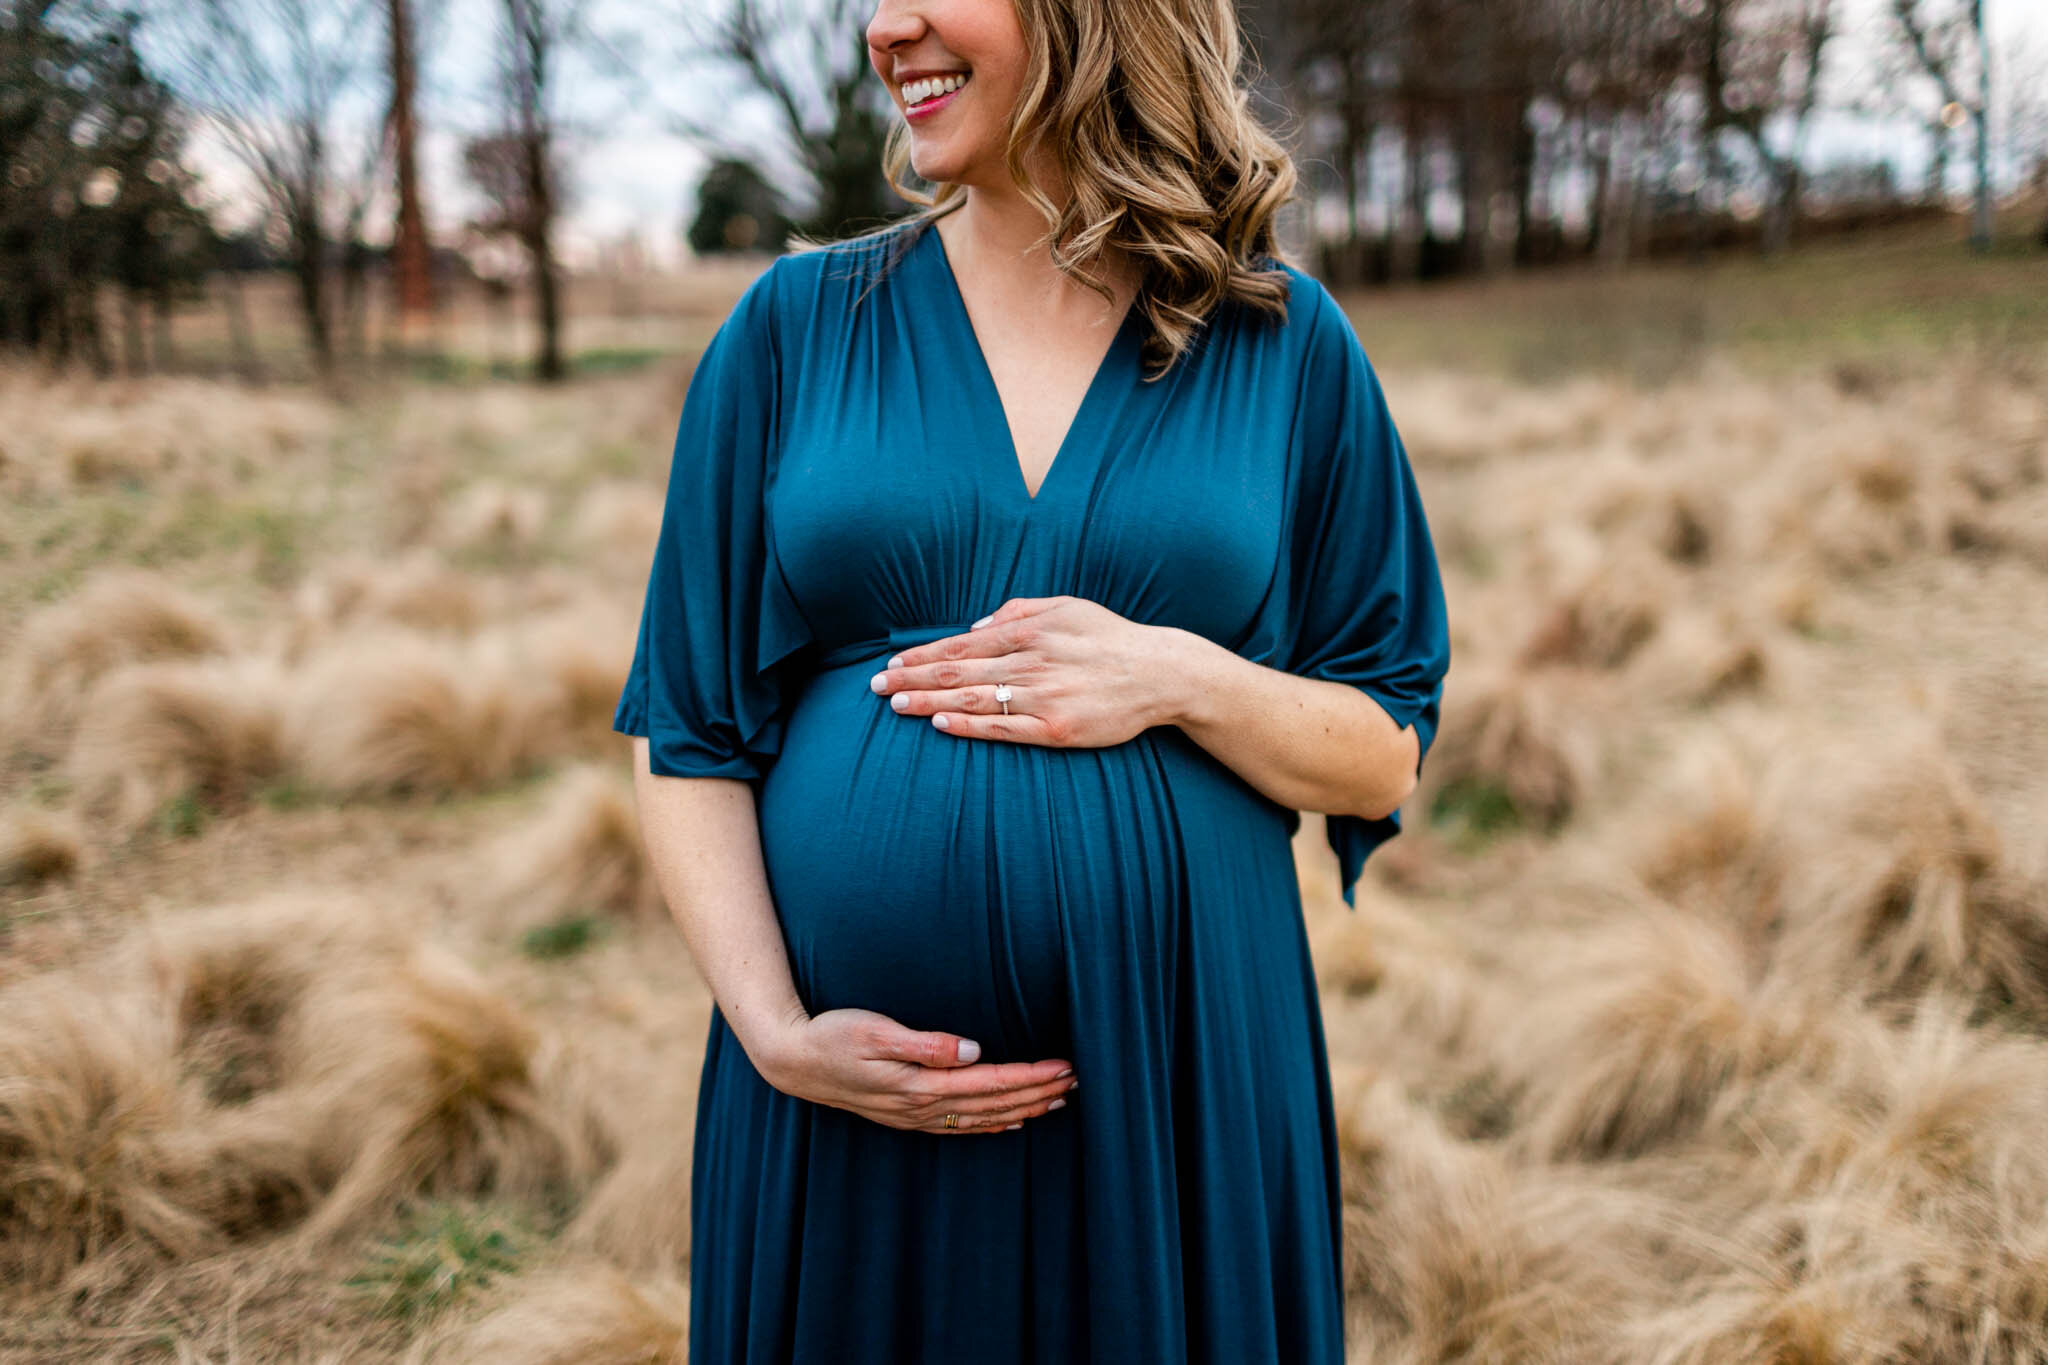 Raleigh Newborn Photographer | By G. Lin Photography | Woman smiling with hands on baby bump at NCMA